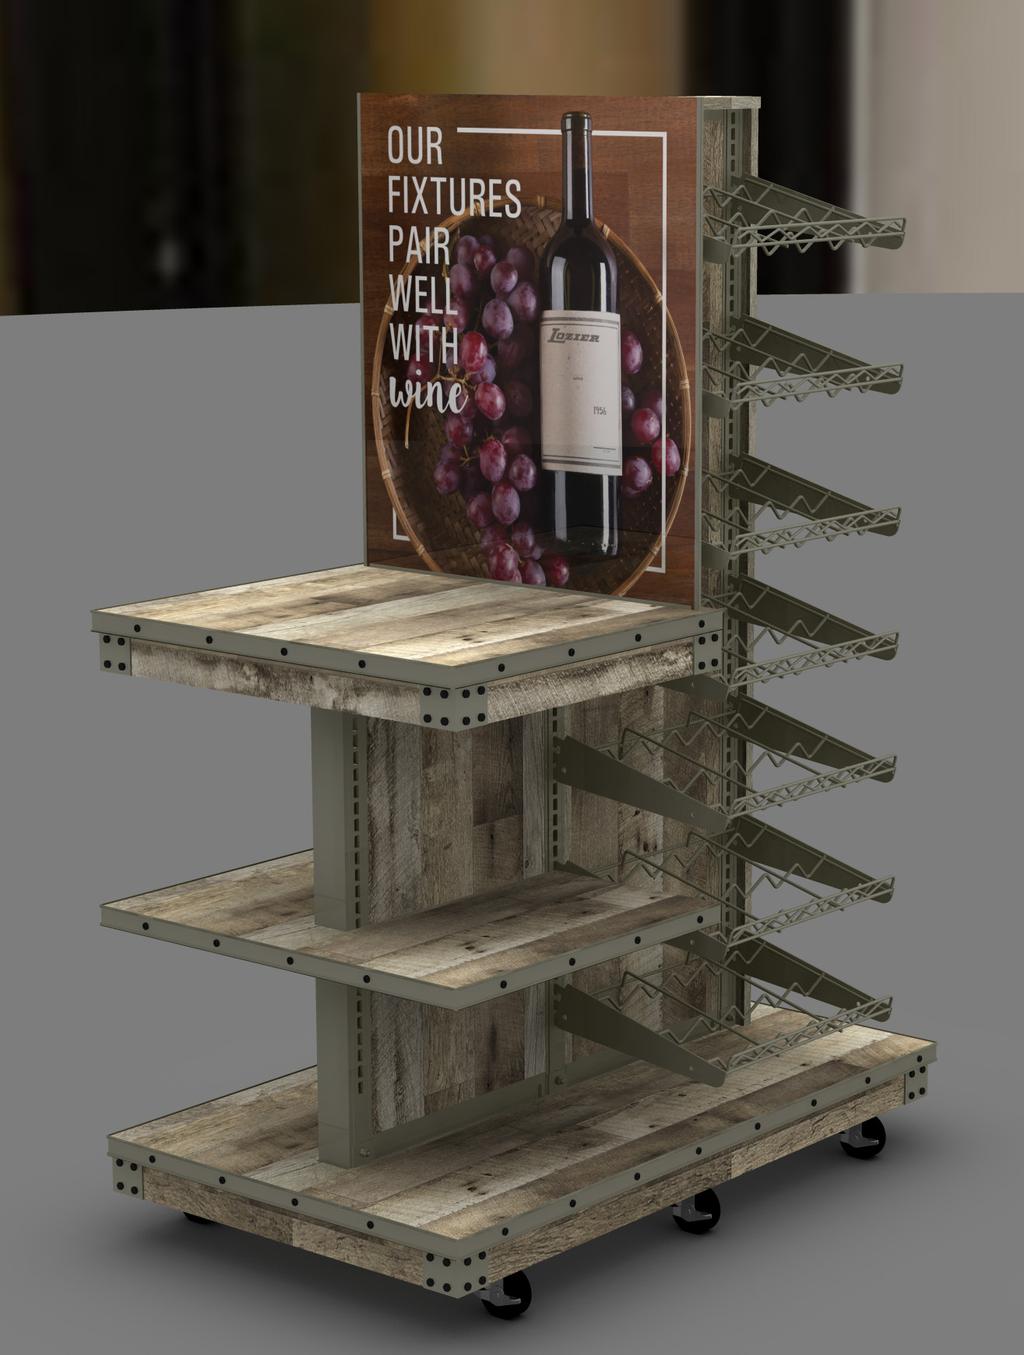 WINE Pair feature product displays with capacity shelving.